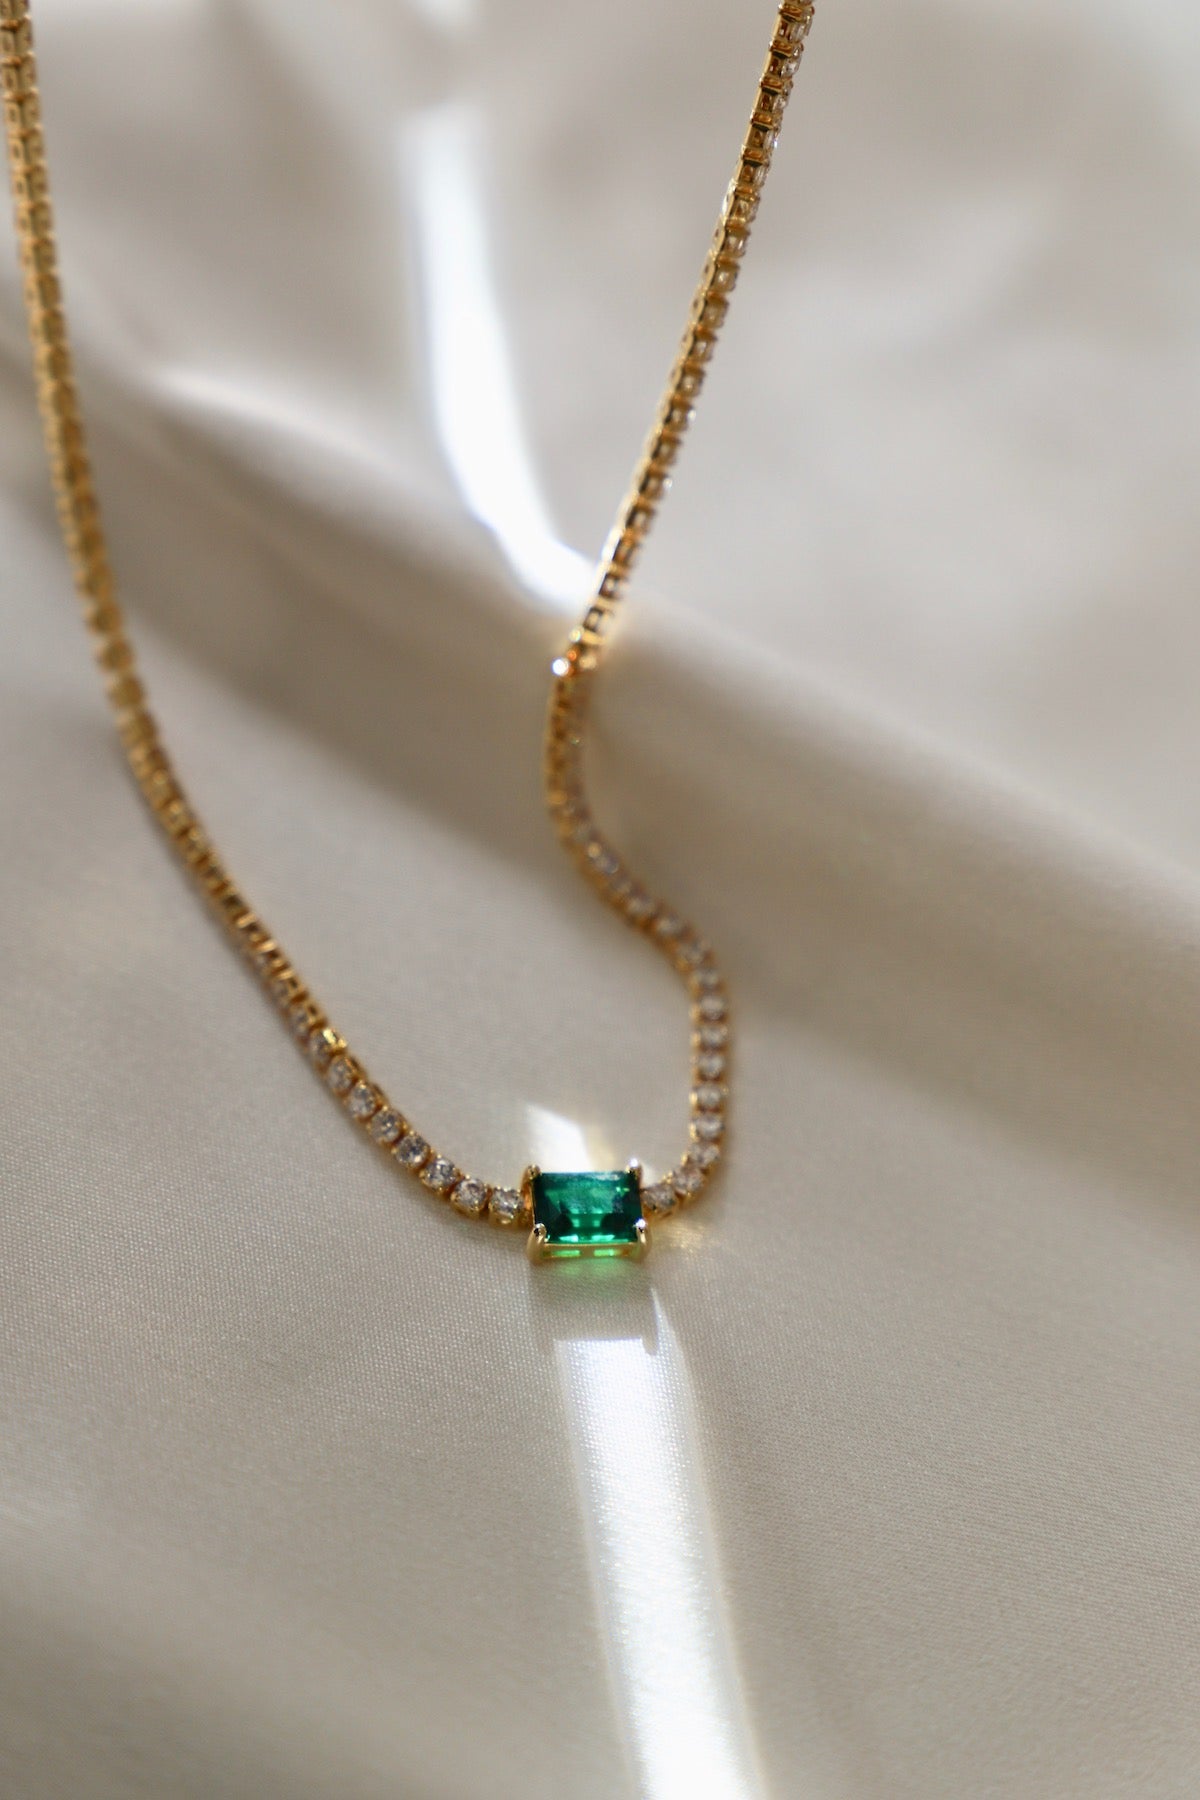 14k Yellow Gold Diamond Emerald Link Necklace - Necklaces